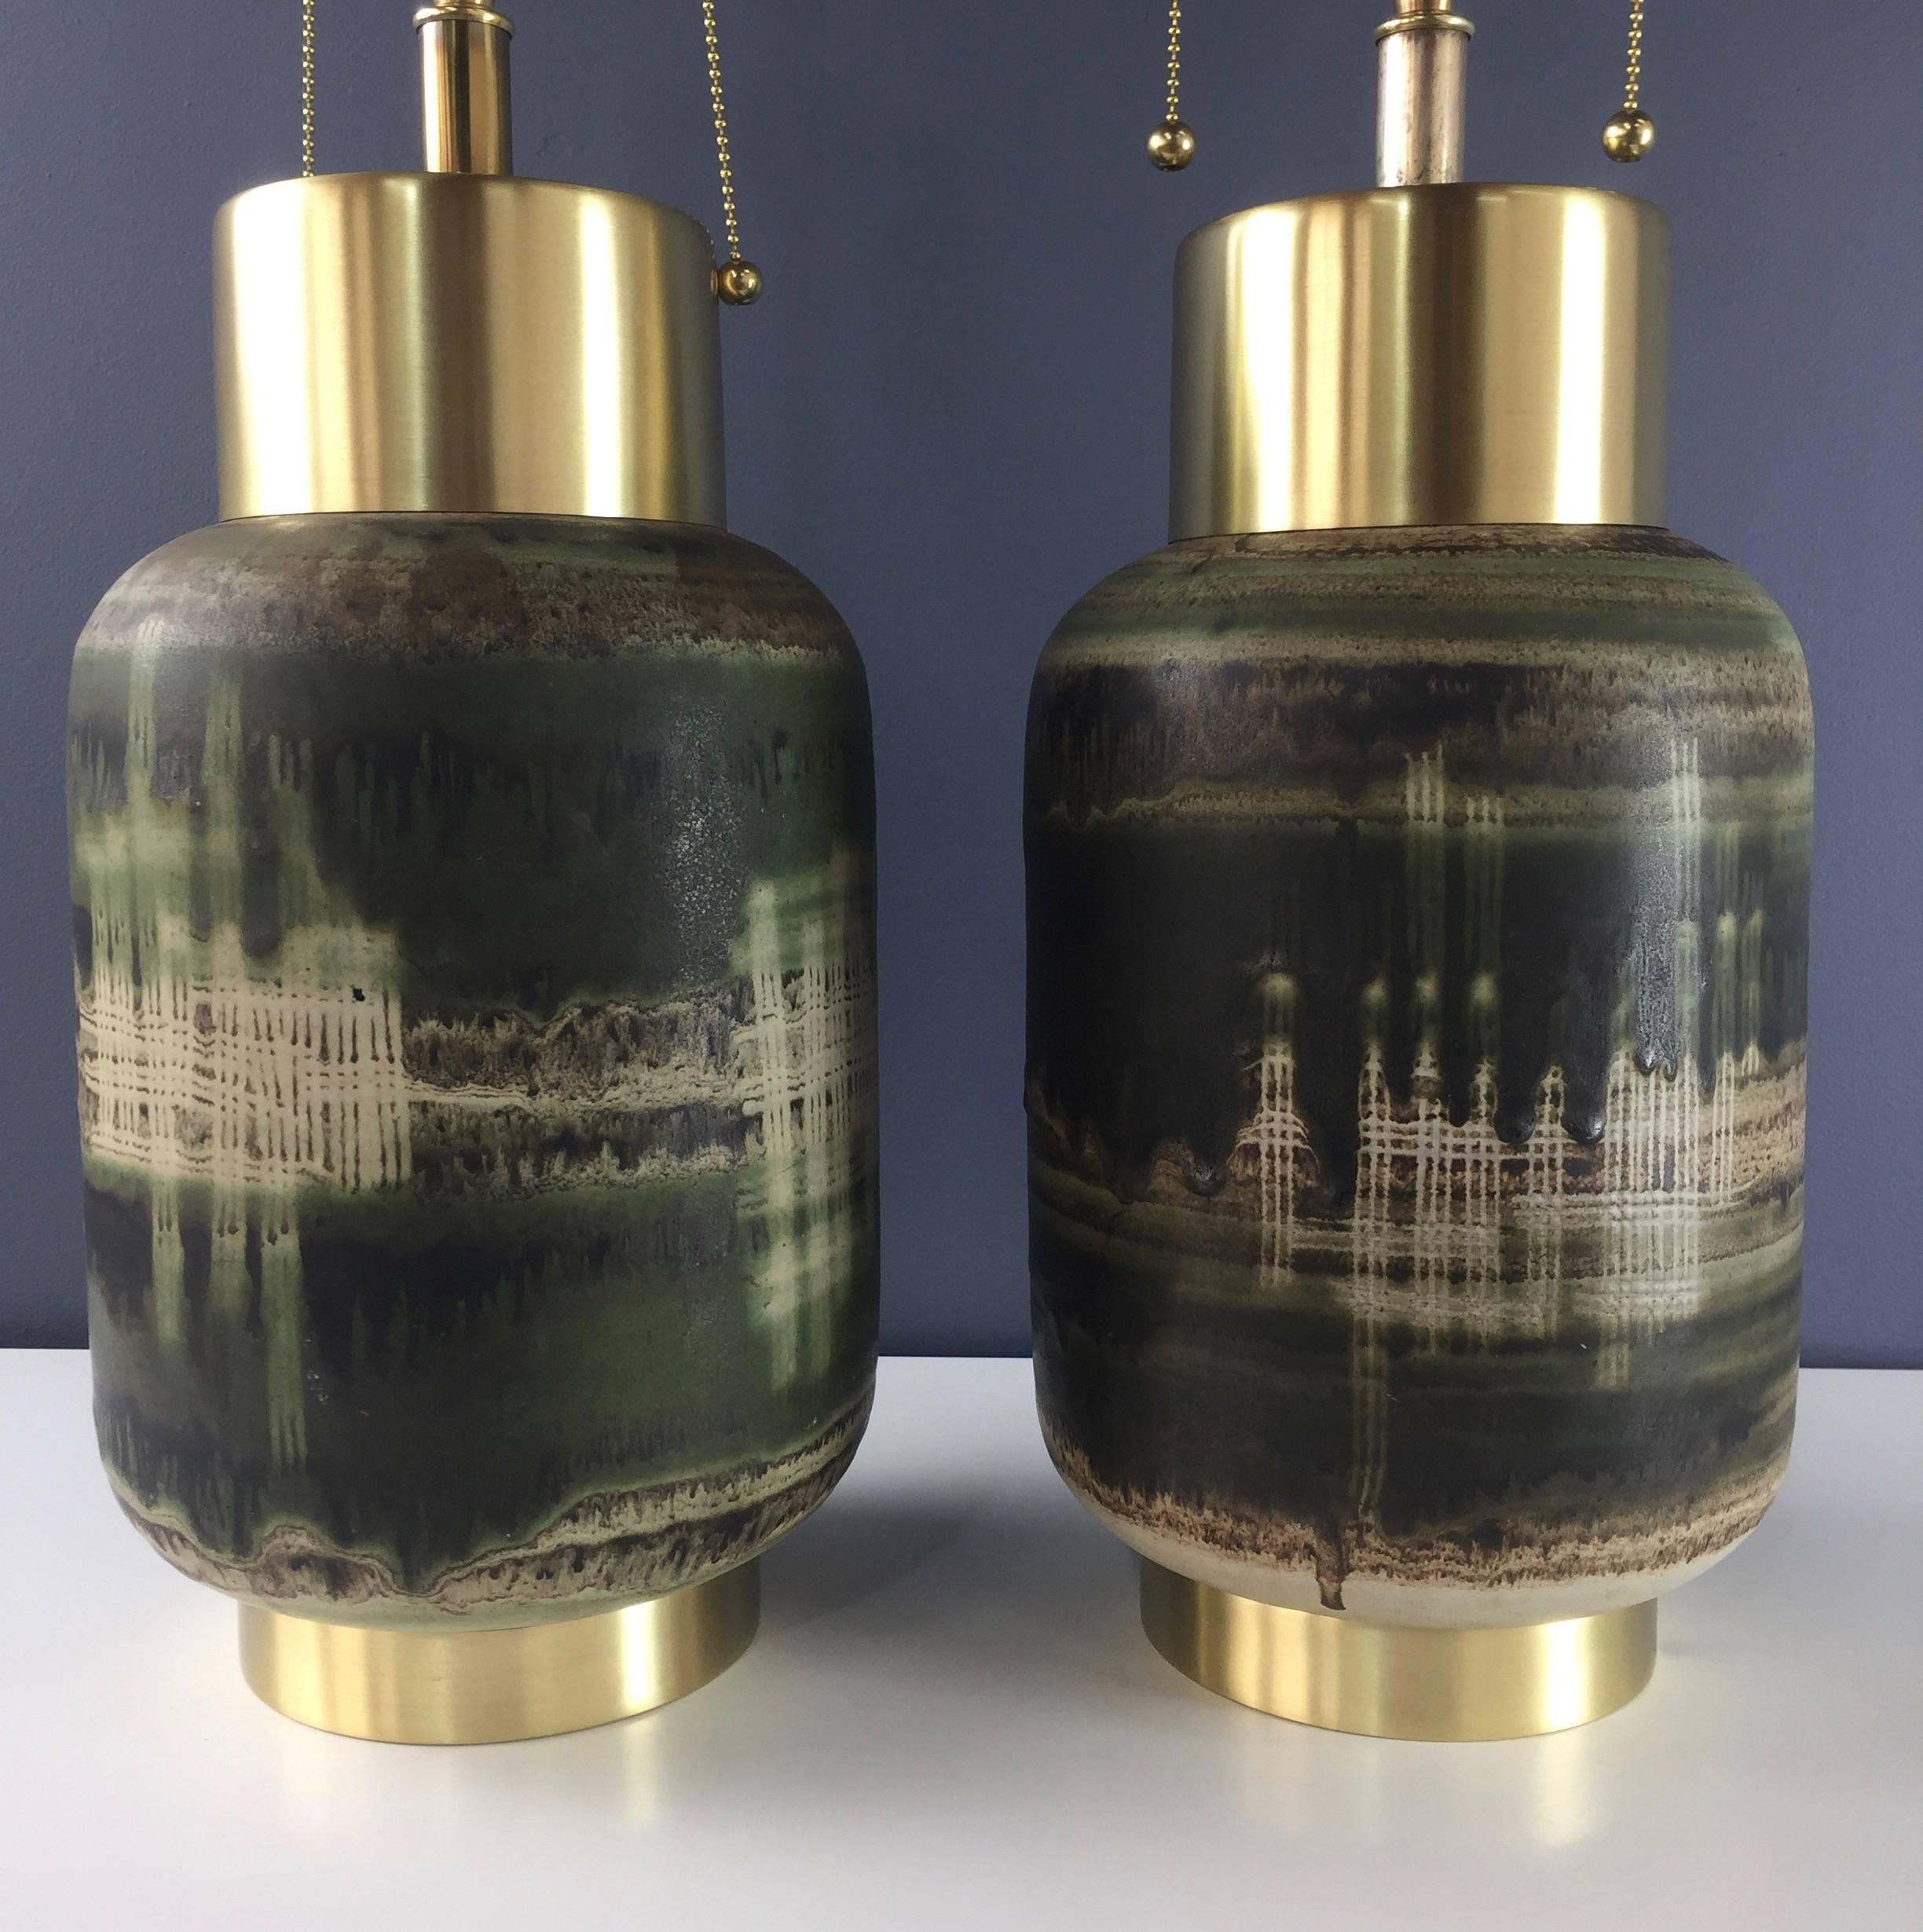 These beautiful Lamps with their striking glaze have had the brass polished and lacquered and have been rewired. They have been attributed to both Design technics and Maria Von Allesch.

Lee Rosen for Design Technics worked in the same period as